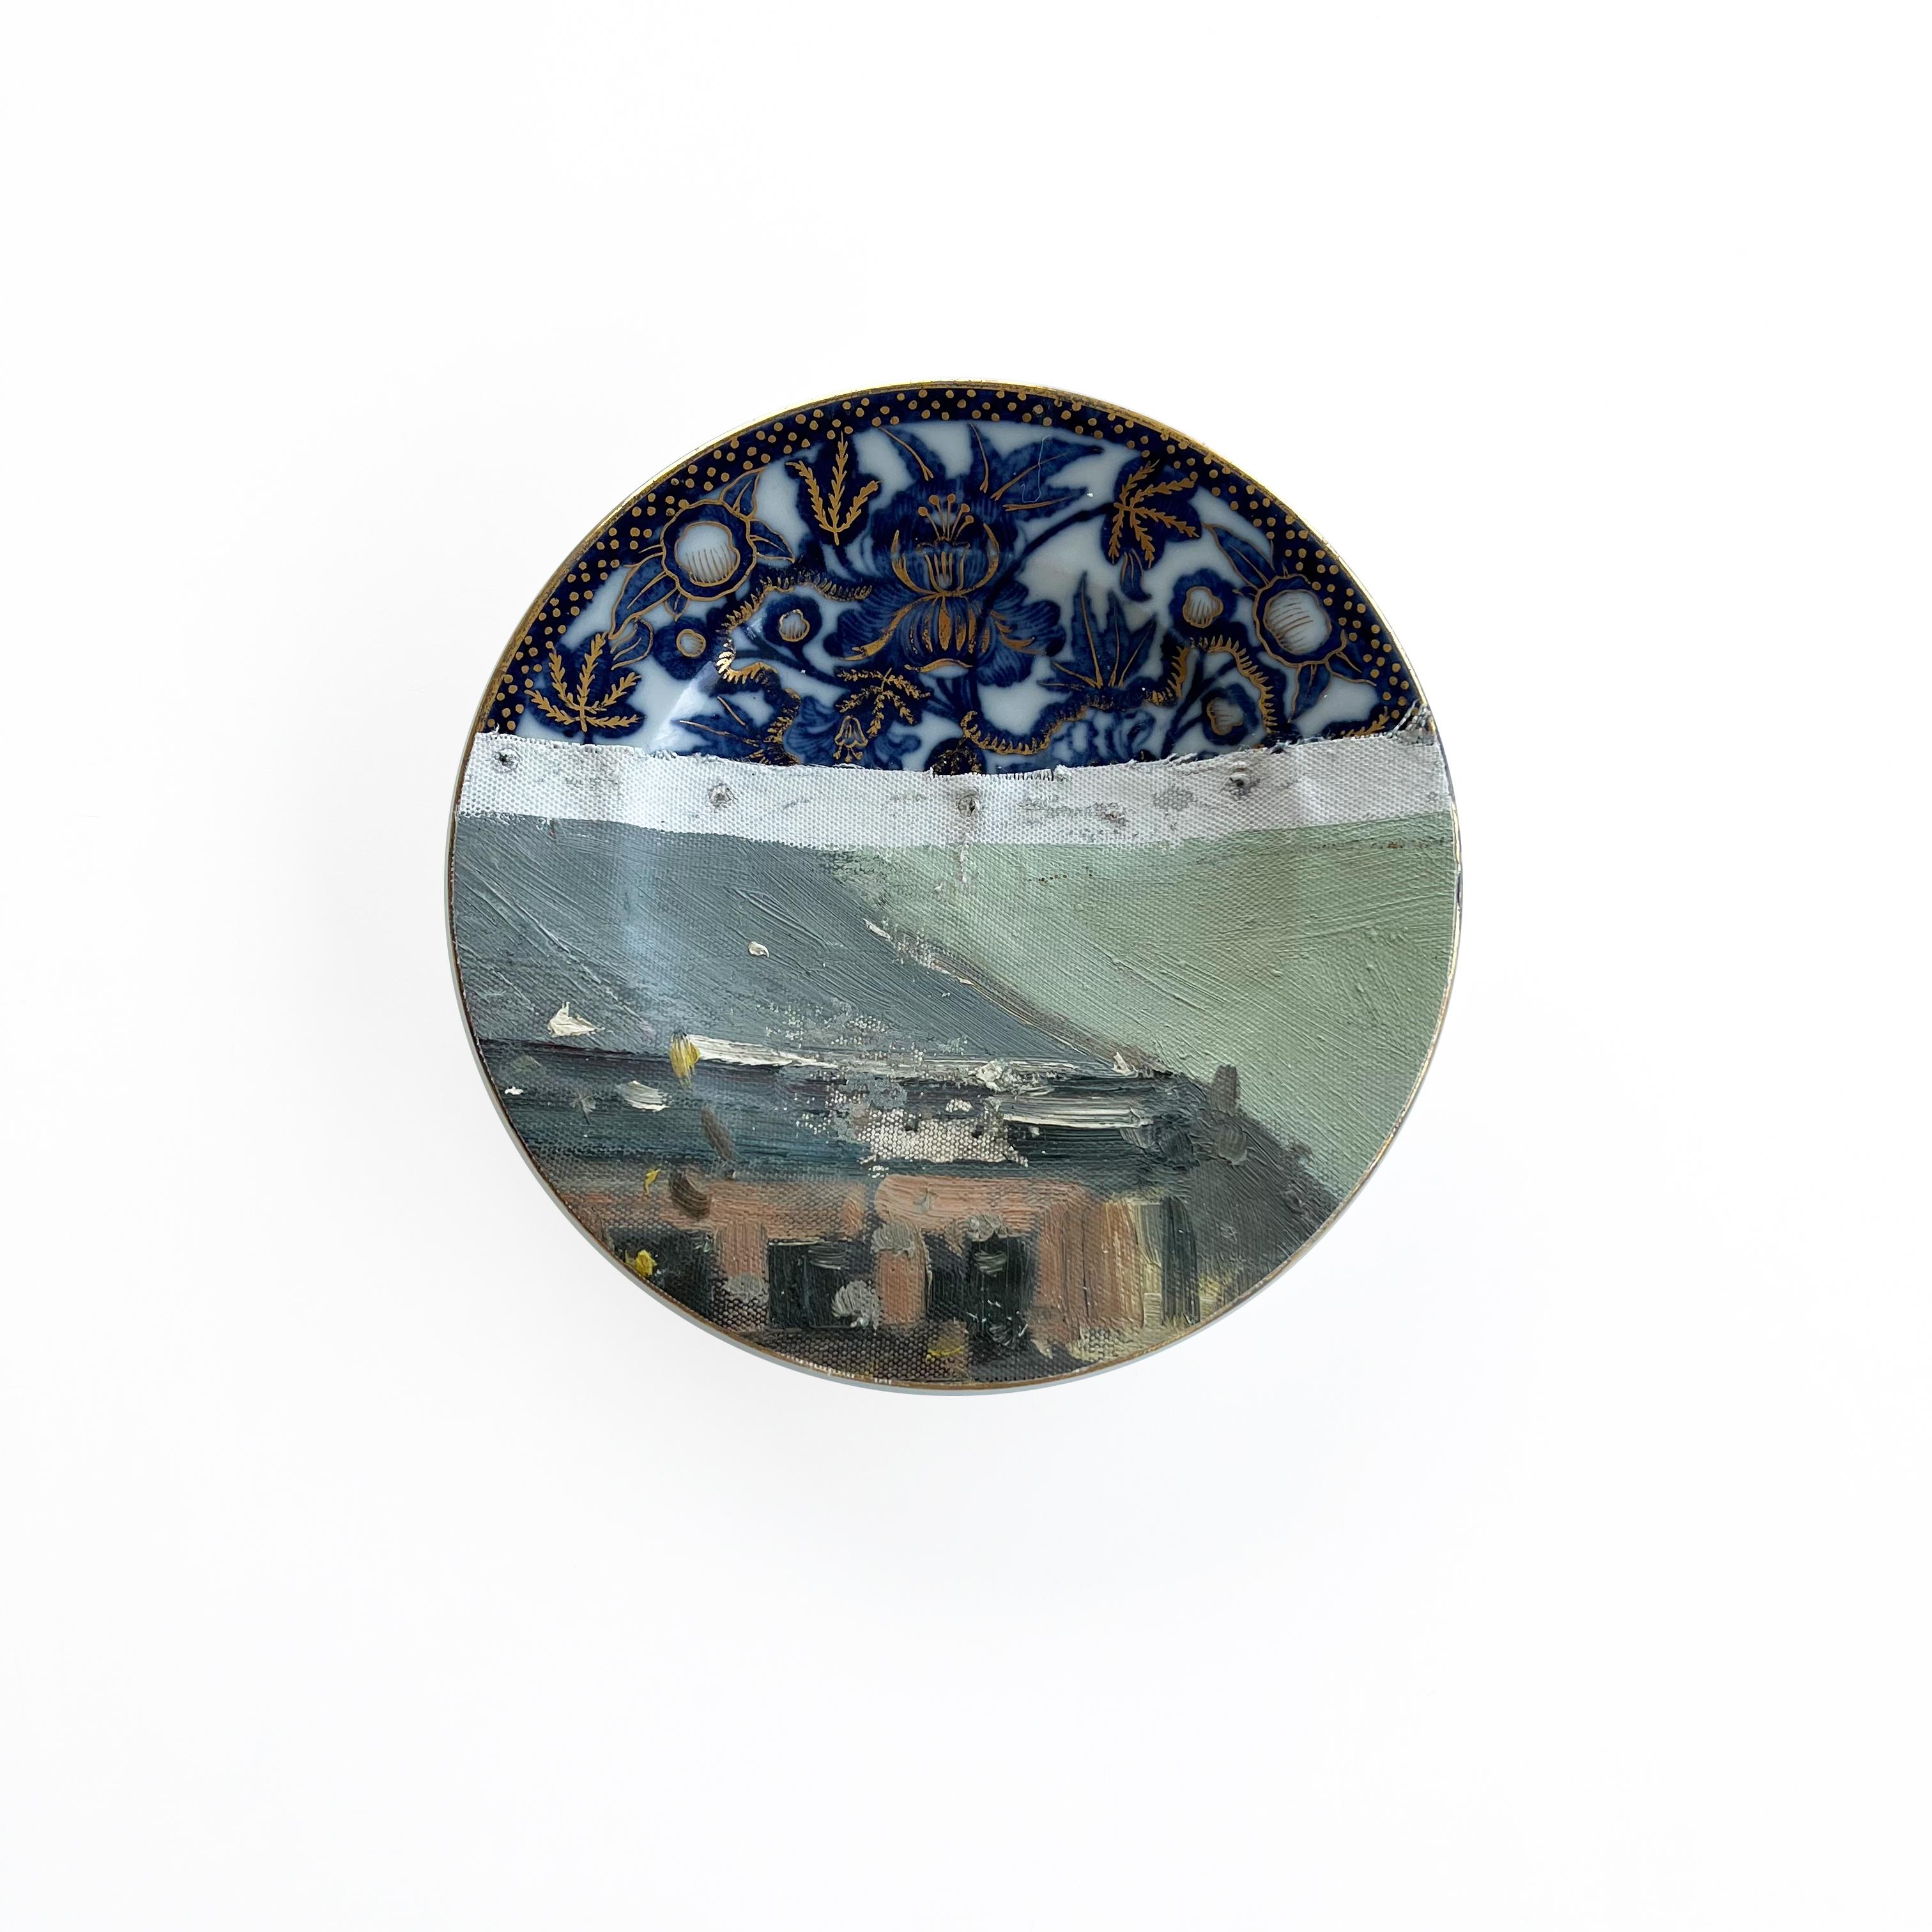 “Paris-Place Malraux” belongs to our “Altered Perspectives” series: assemblages of ceramic plates layered with a painting on canvas.
This artwork includes 6 late 19th C. European blue & white plates combined with a painting on canvas of Place André